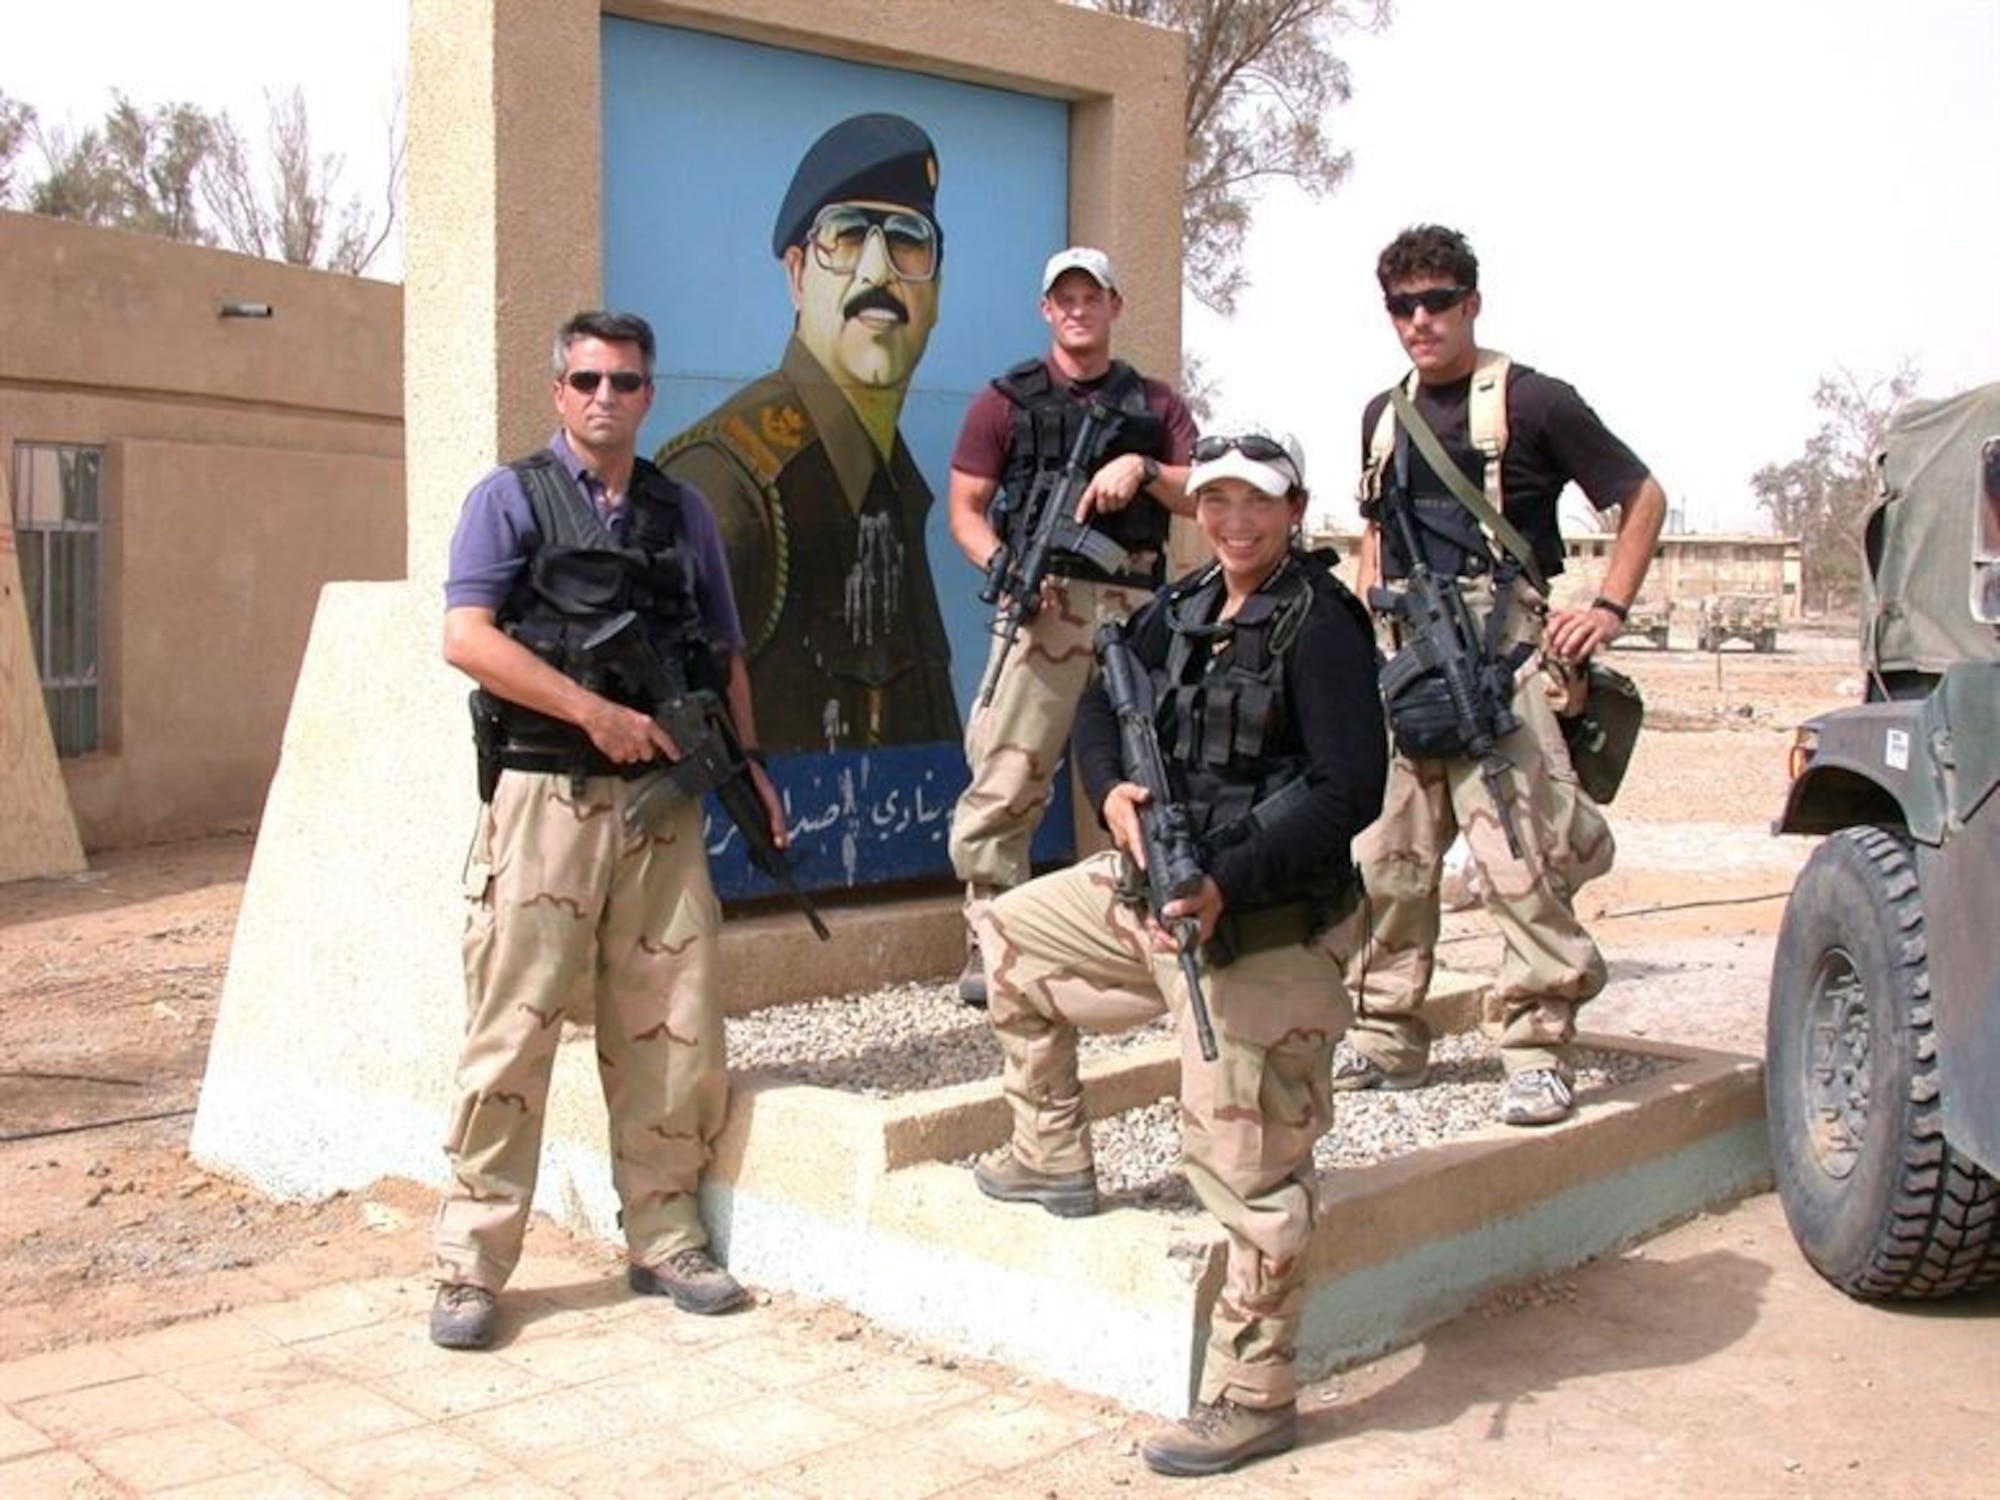 These four OSI agents in front of a Saddam Hussein portrait, were the first OSI agents in Iraq at the start of operation IRAQI FREEDOM. (U.S. Air Force photo)